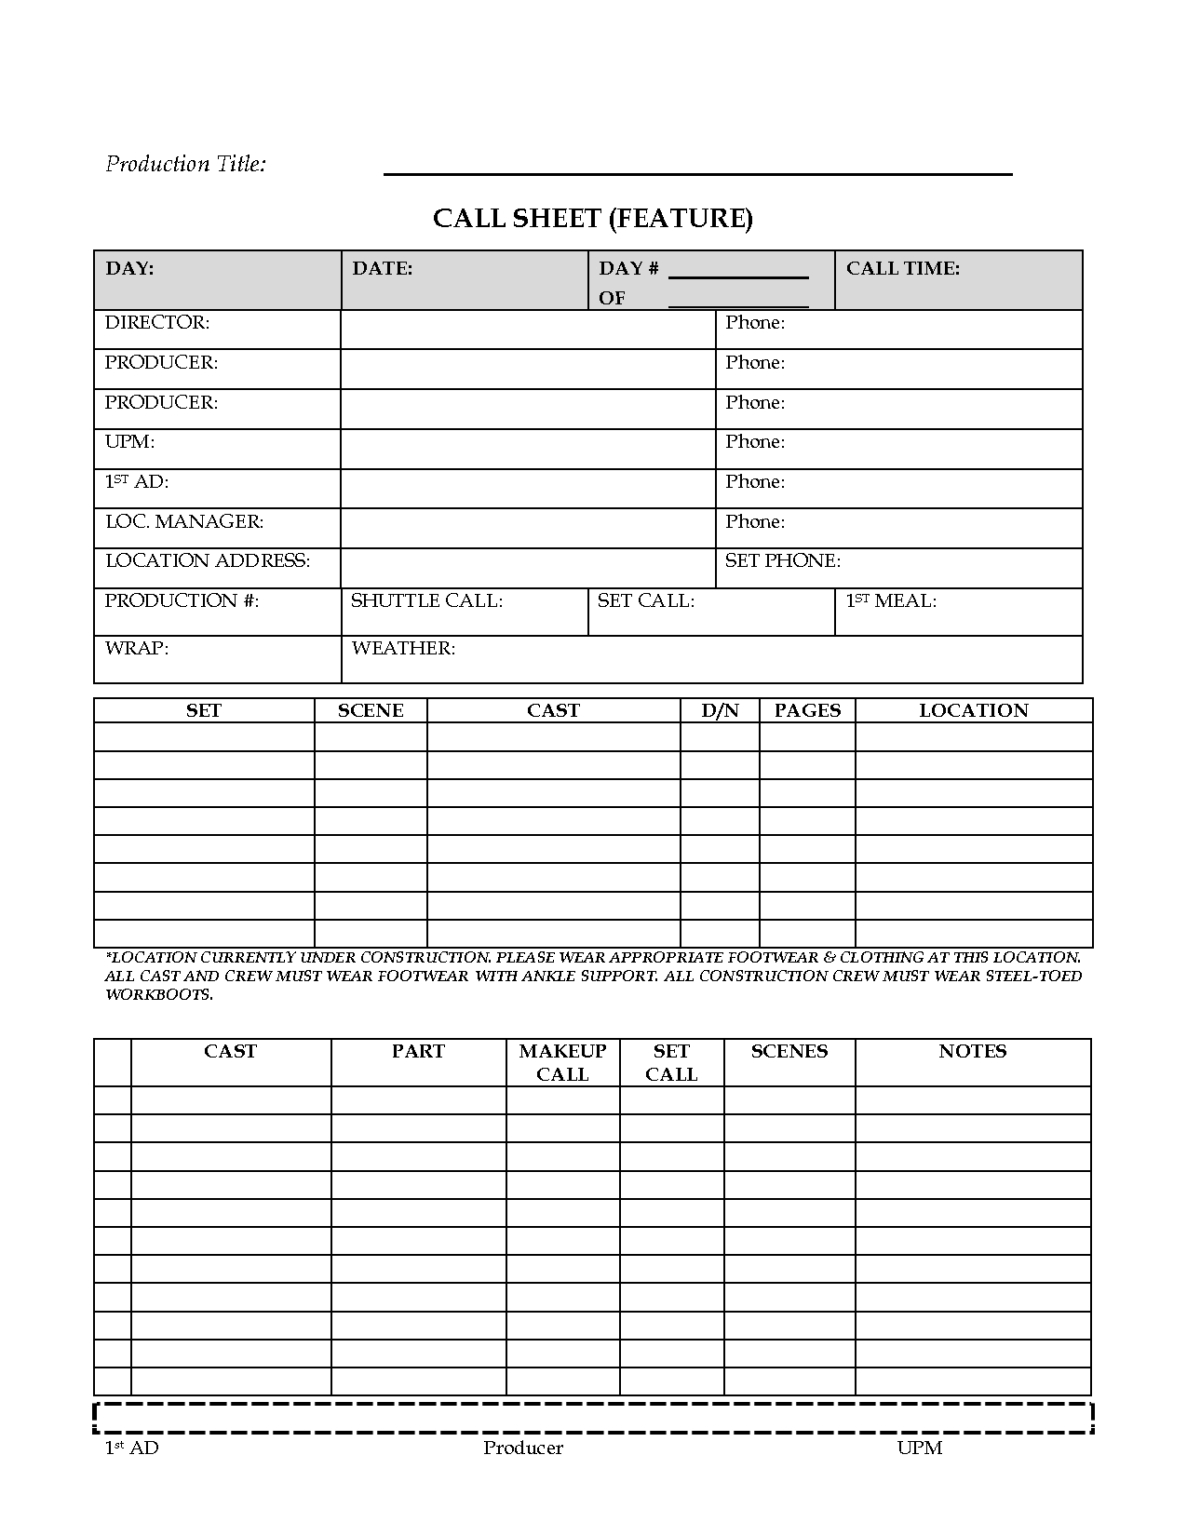 Awesome Call Sheet (Feature) Template Sample For Film Regarding Blank